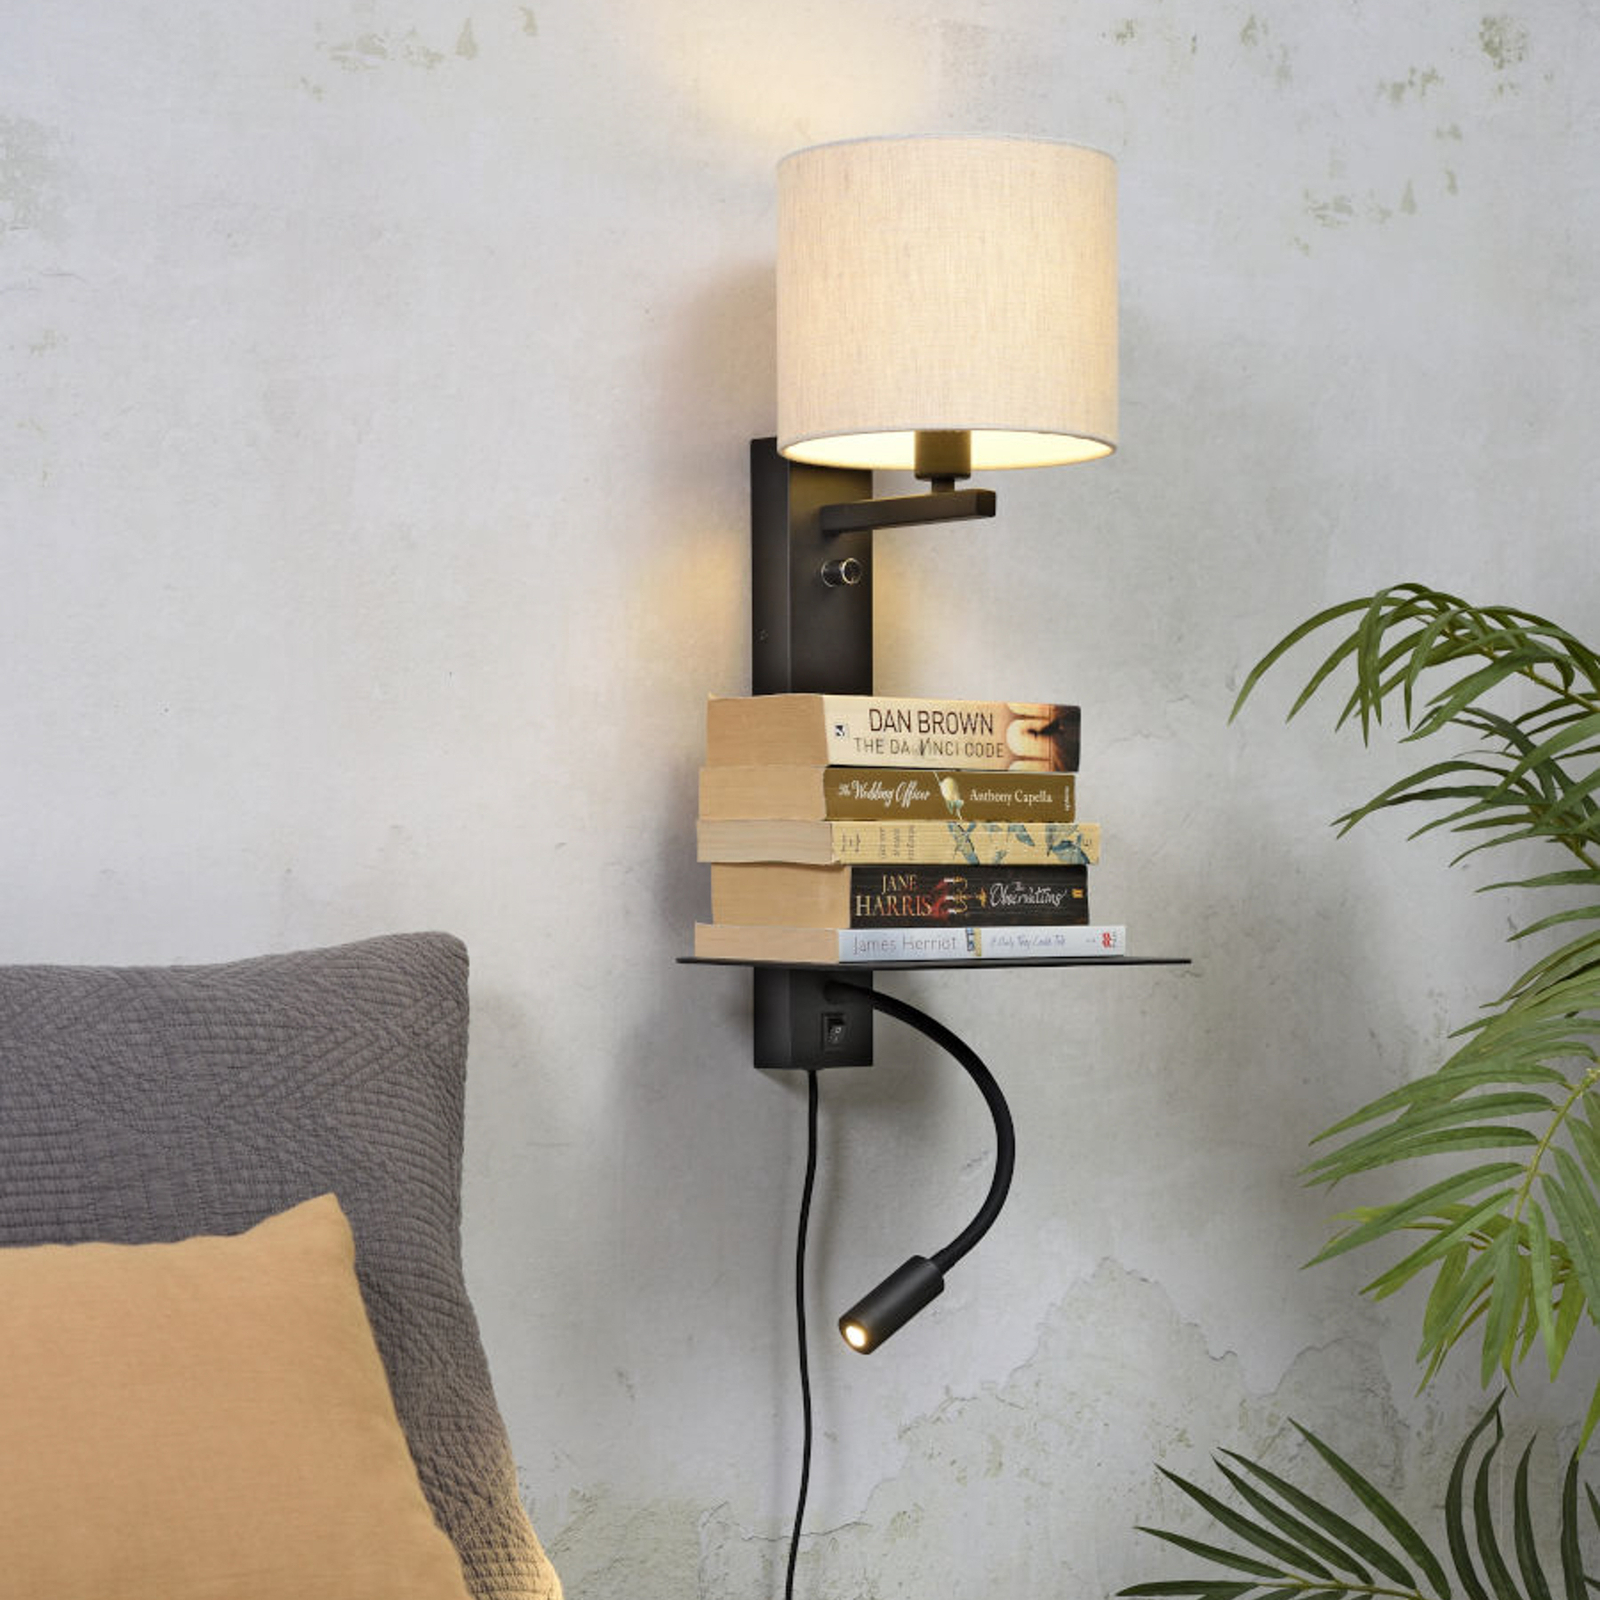 It's about RoMi Florence reading lamp 2-bulb linen bright